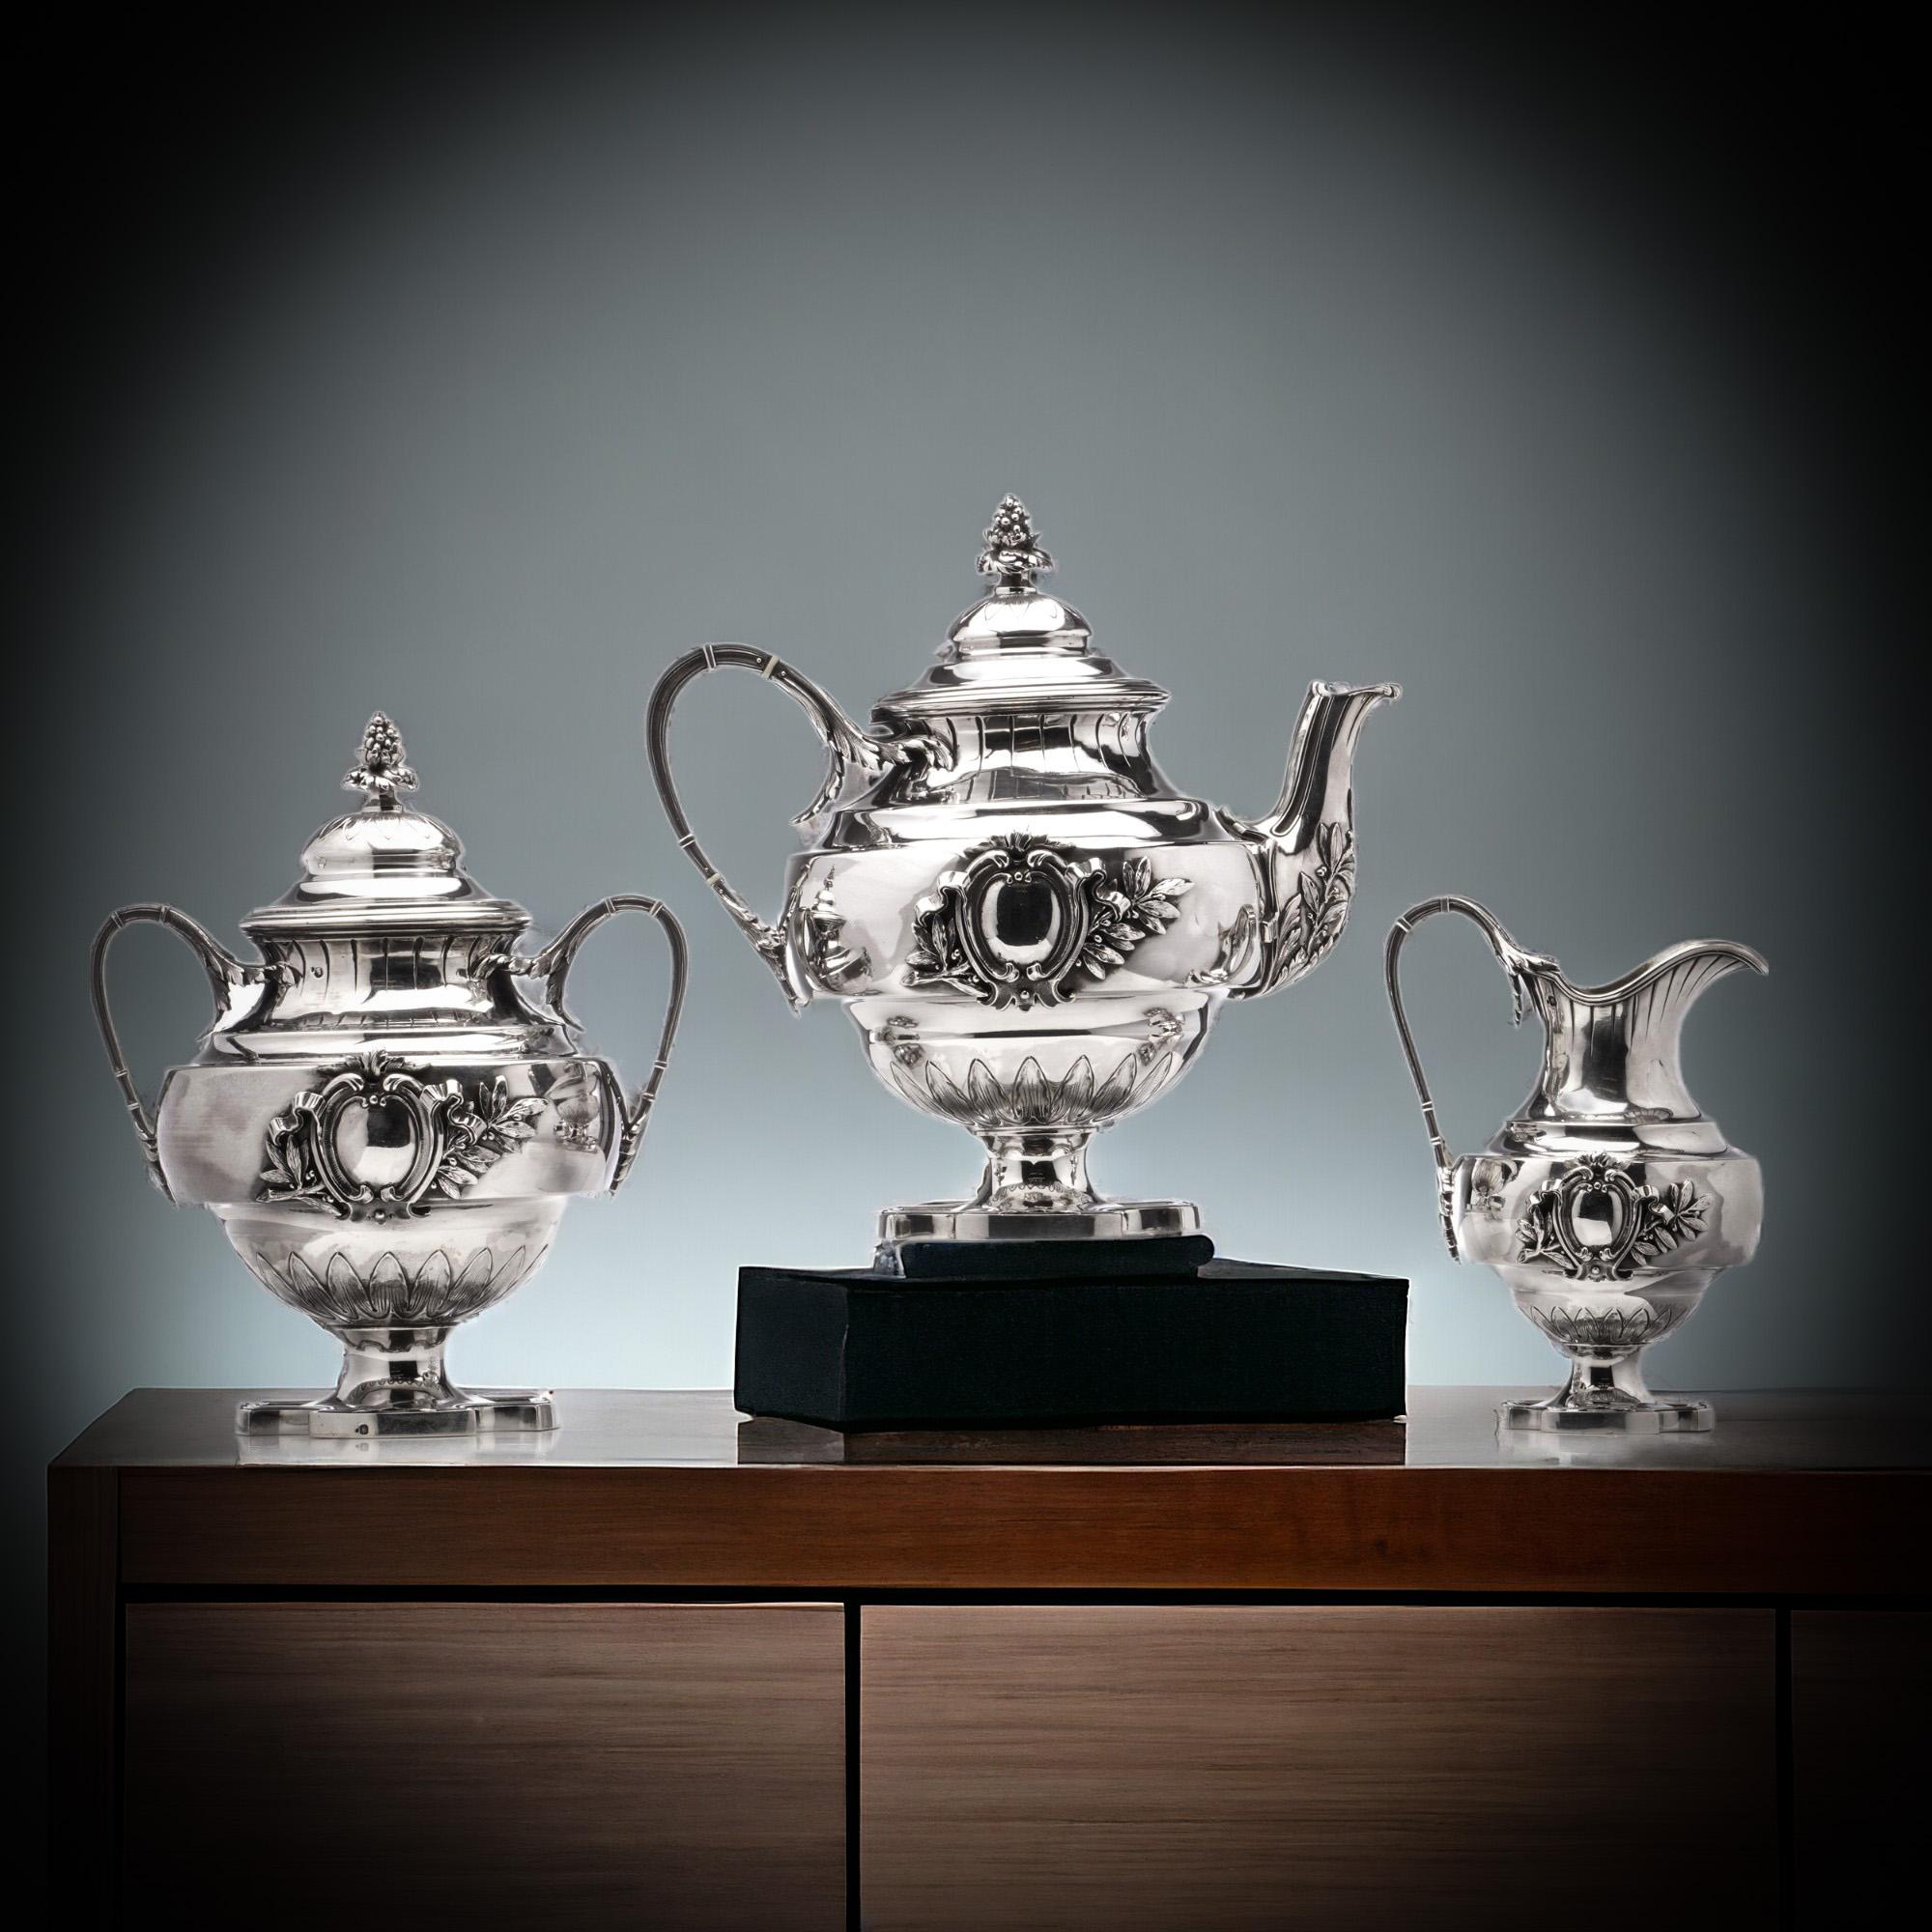 Step into the enchanting world of exquisite craftsmanship with this remarkable Antique French 950 Silver Three-Piece Tea Service Set by the esteemed silversmith Paul Canaux & Cie.
Made in France between 1892 and 1911. 

Paul Canaux & Cie., a name